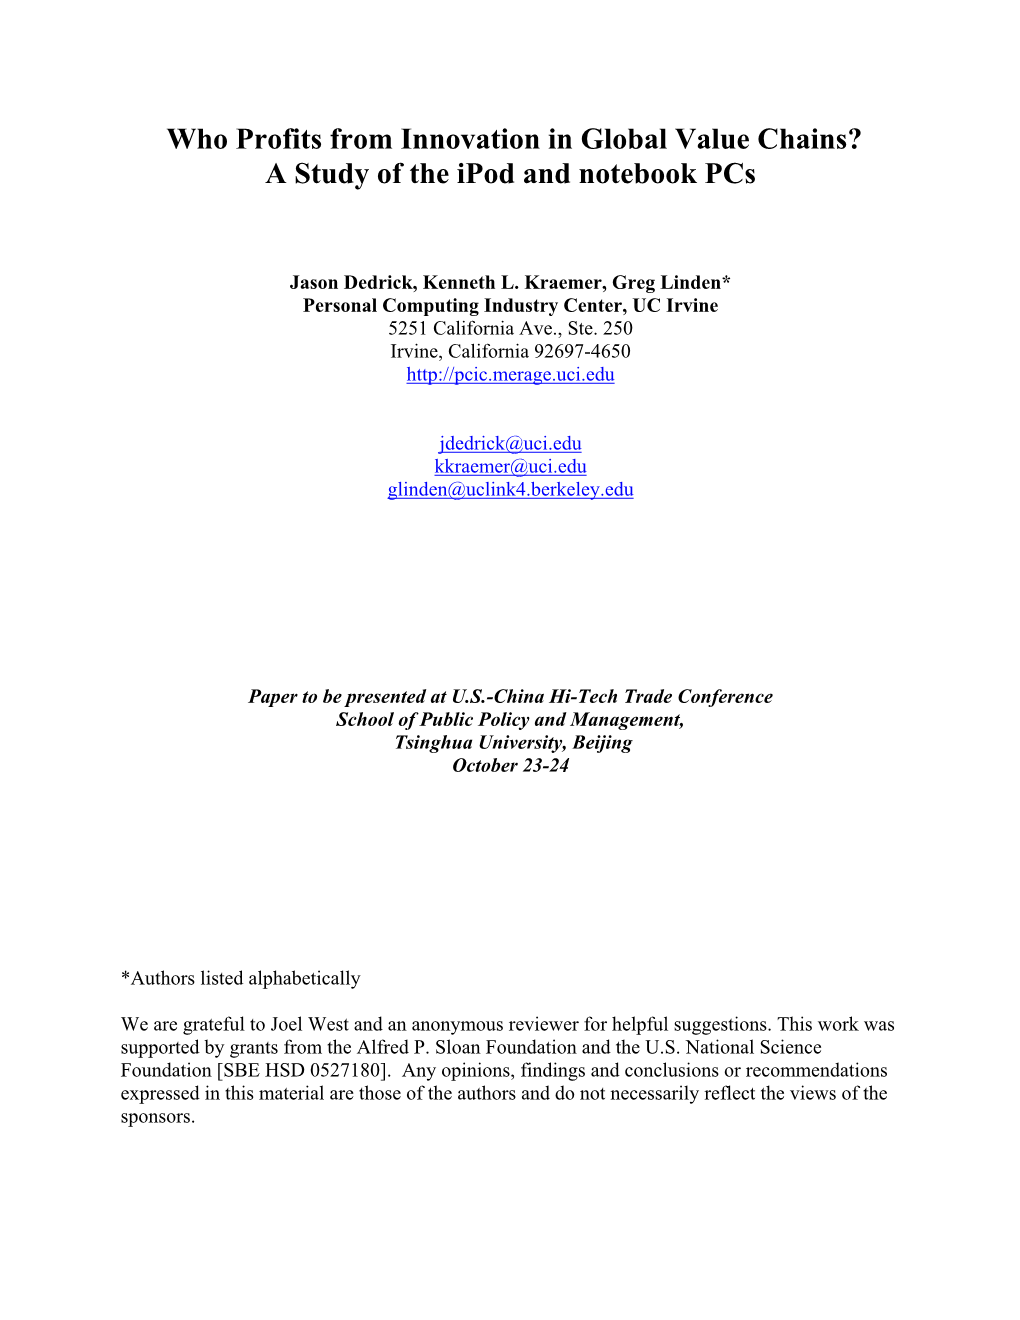 Who Profits from Innovation in Global Value Chains? a Study of the Ipod and Notebook Pcs